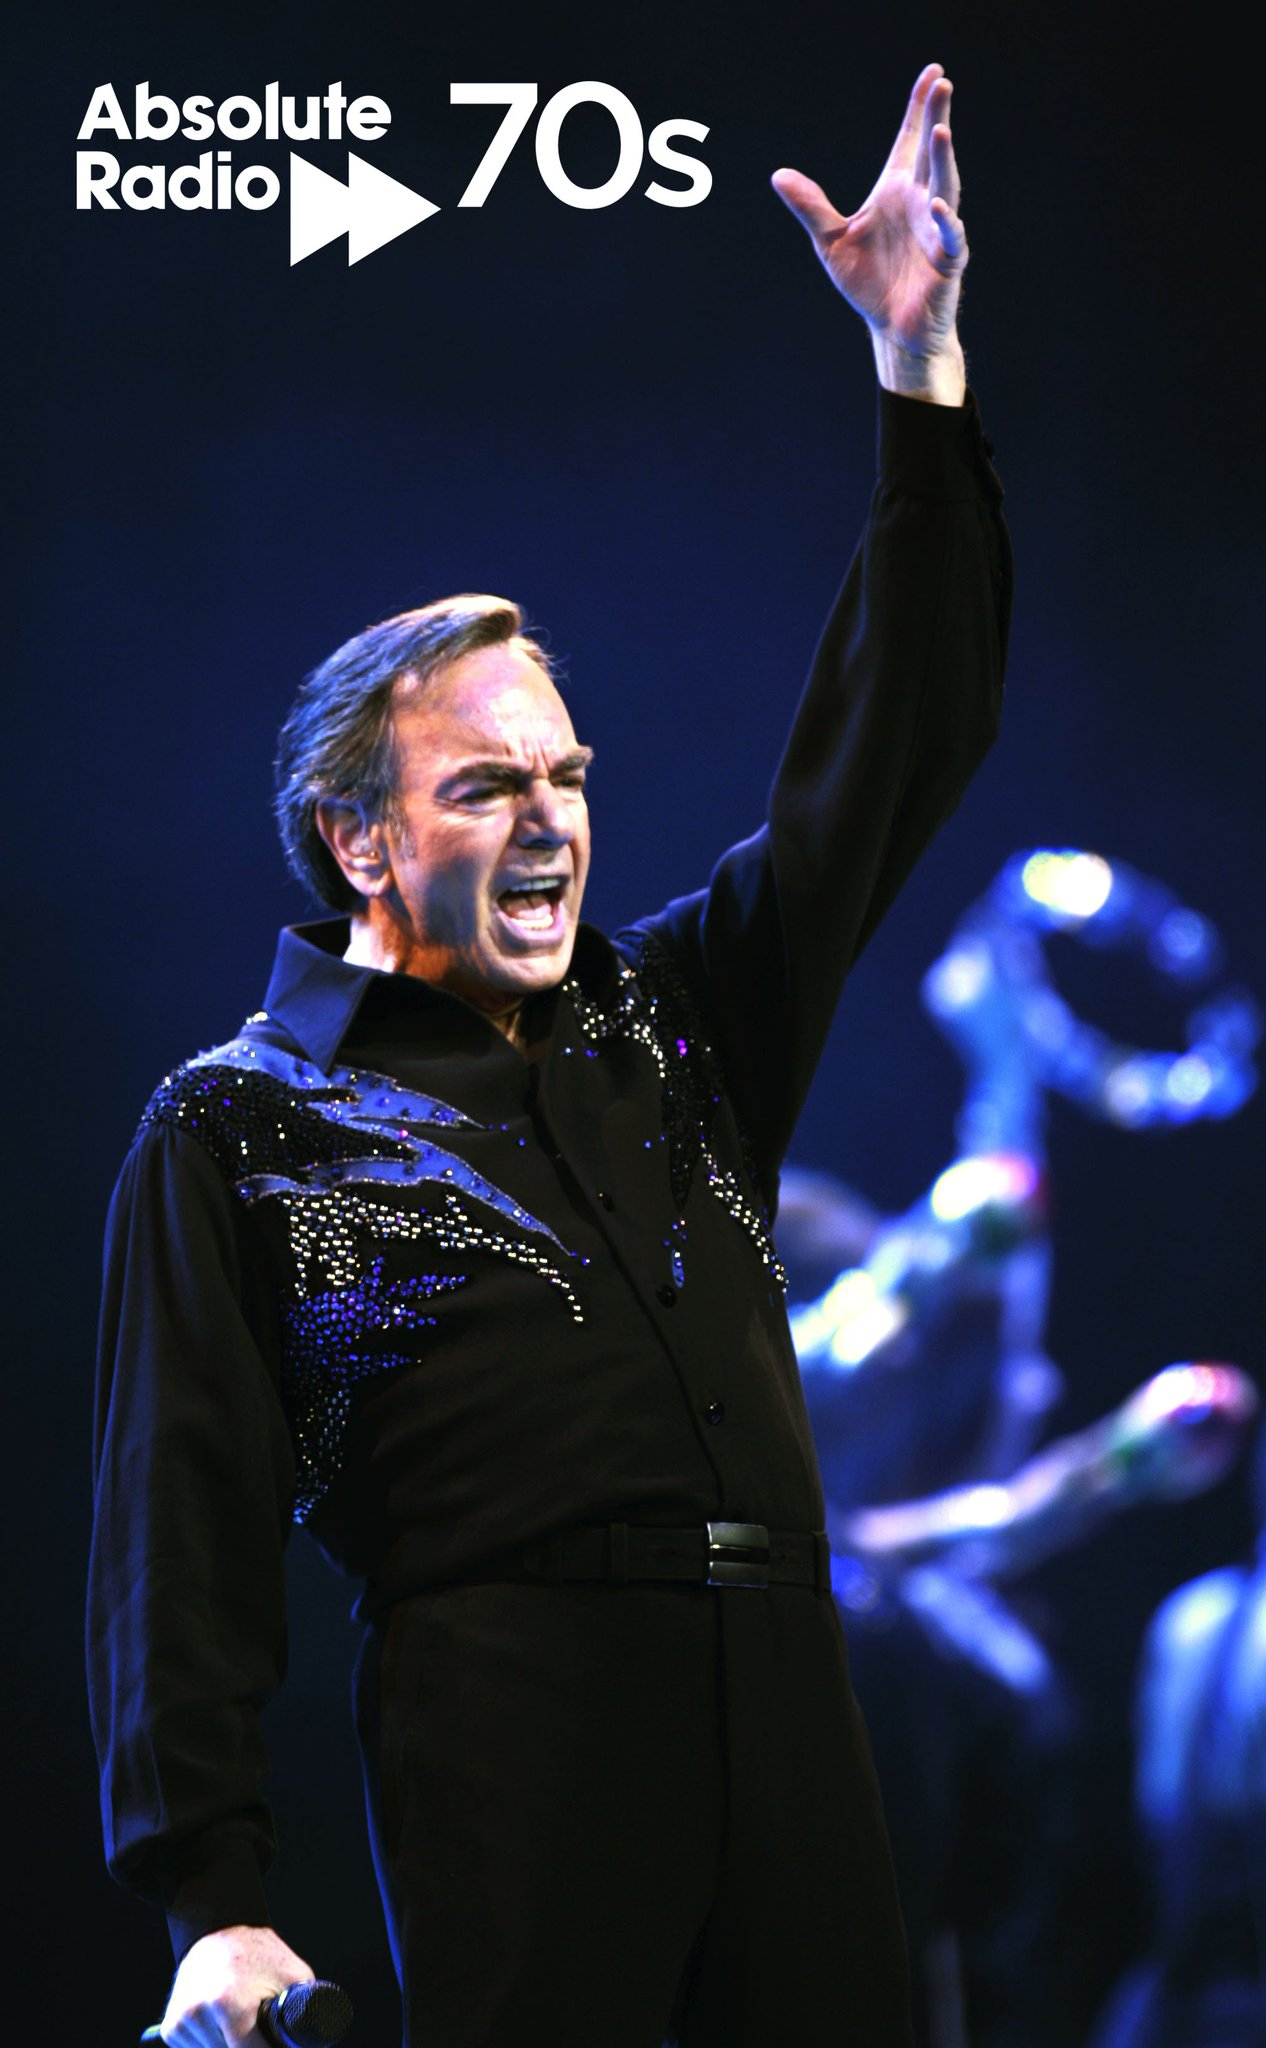 Wishing a very Happy Birthday to the one and only Neil Diamond!  